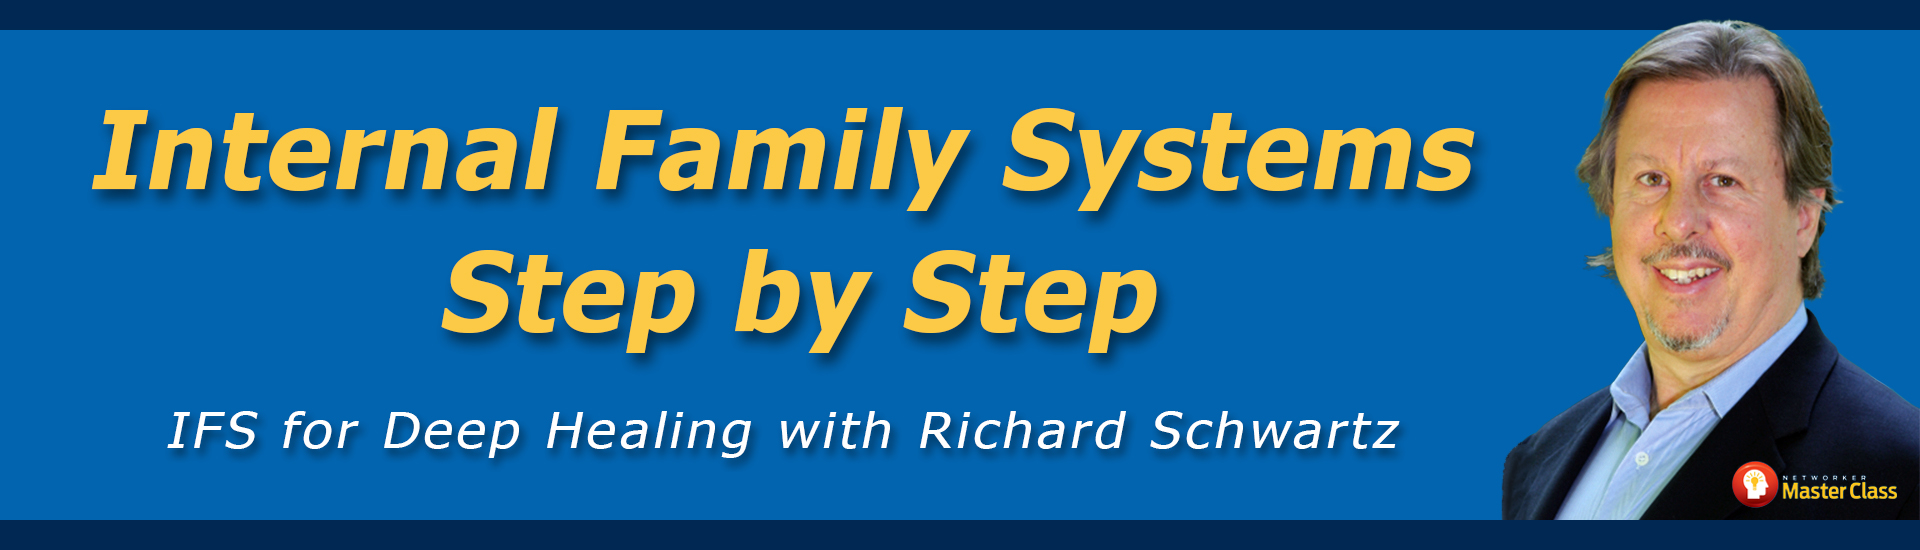 Internal Family Systems Step-by-Step: IFS for Deep Healing with Richard Schwartz